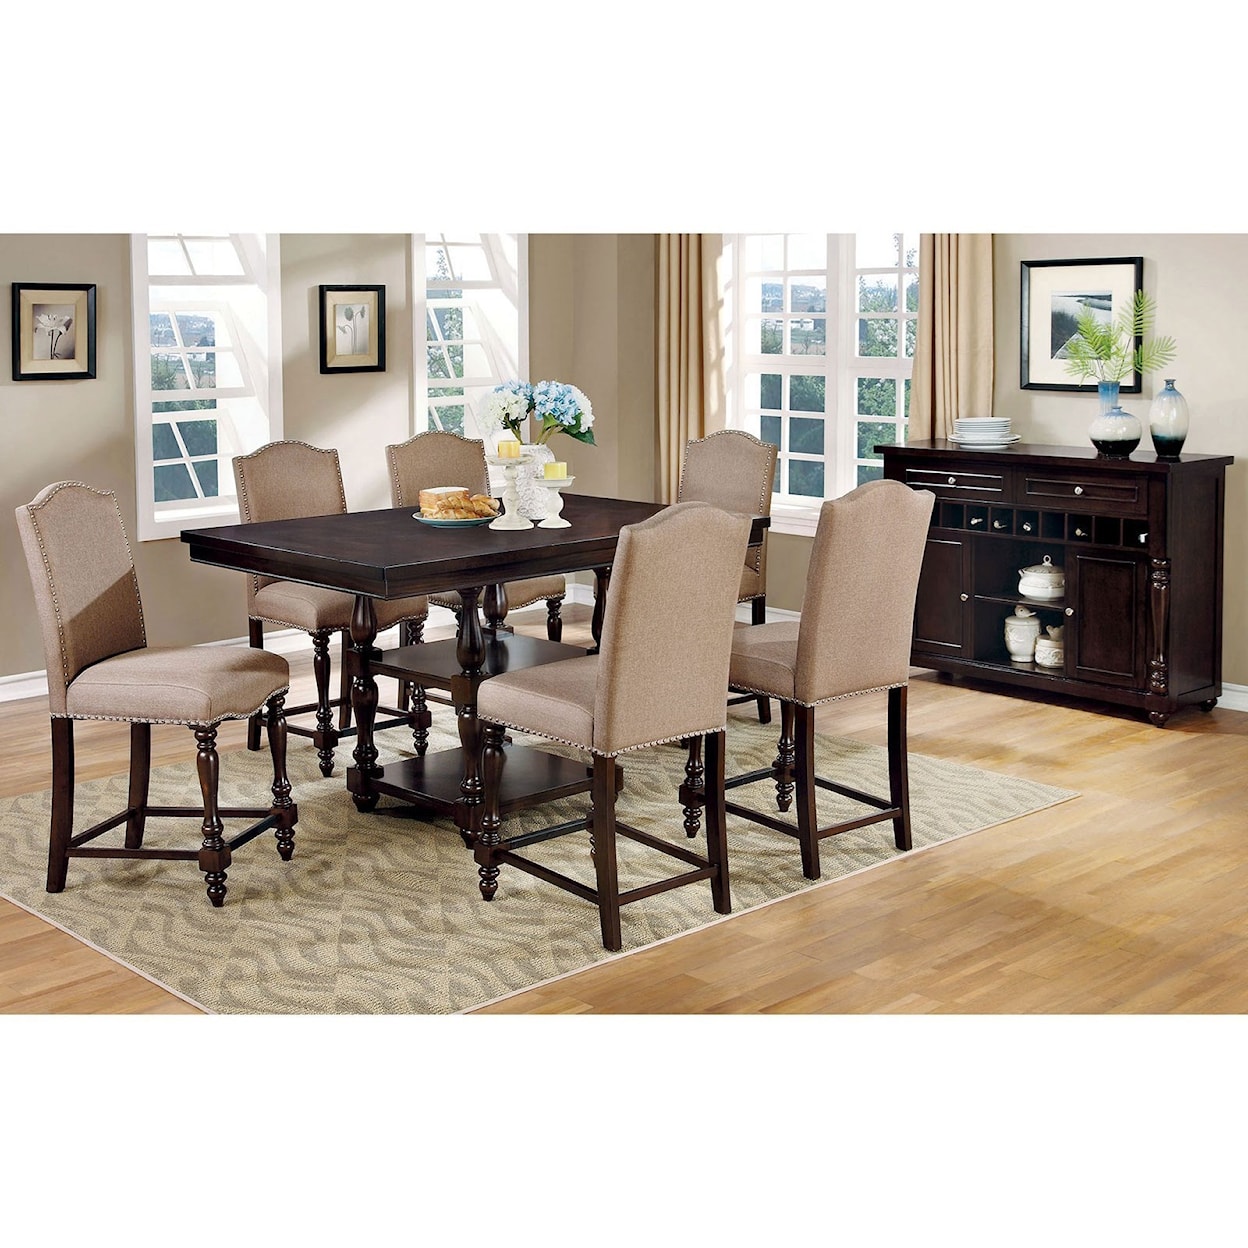 Furniture of America Hurdsfield Set of 2 Counter Height Chairs